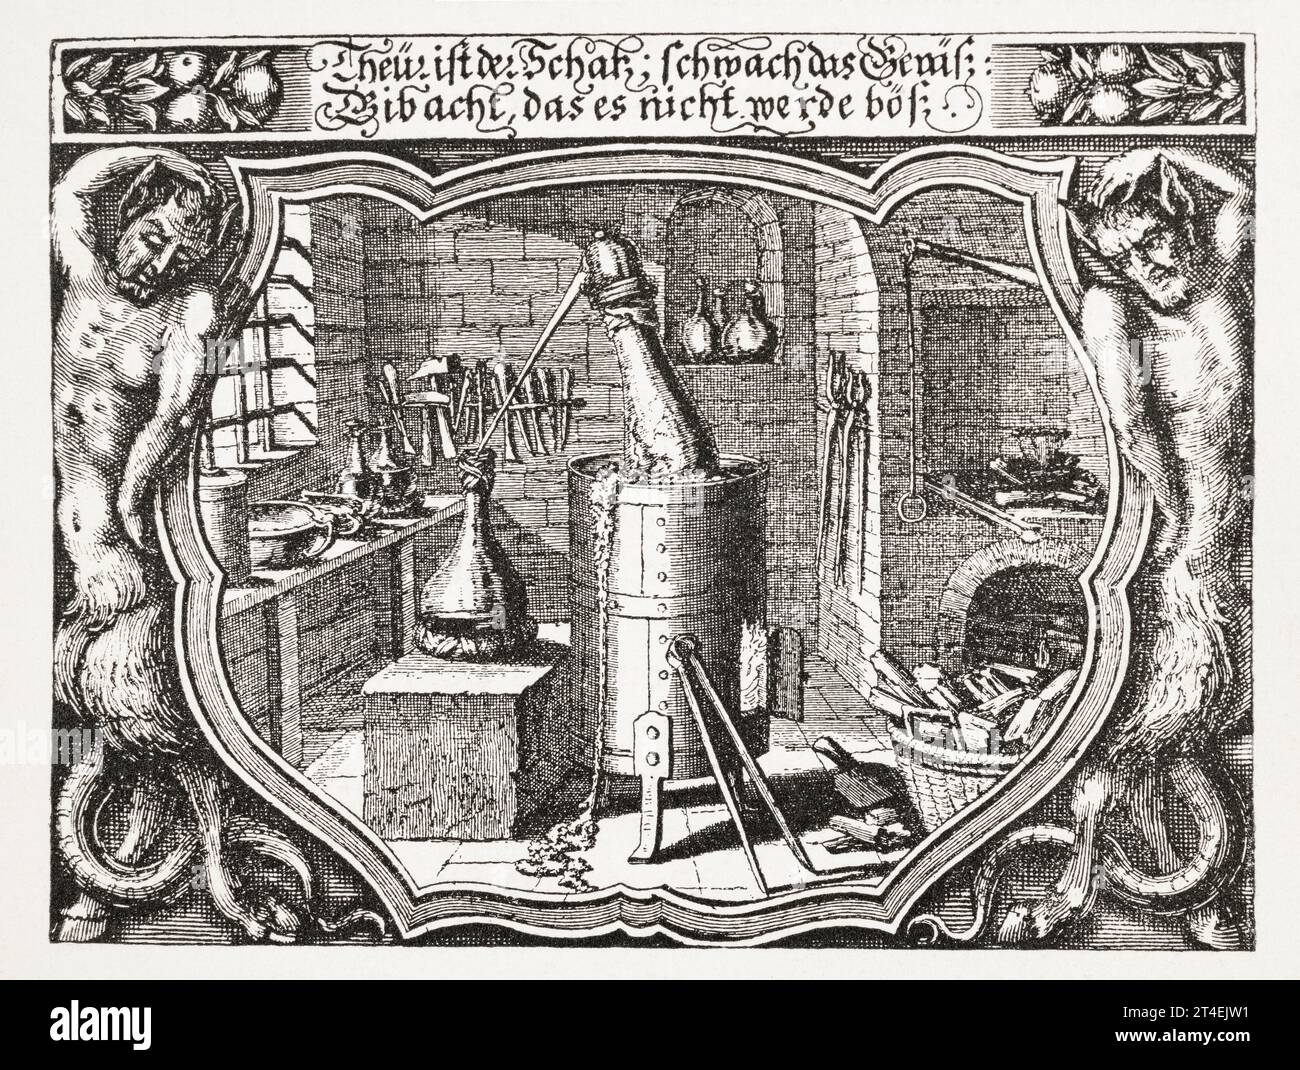 17th c. pharmacy / apothecary laboratory; portable stove with distilling equipment including retort / alembic apparatus. 1663. See Notes. Stock Photo